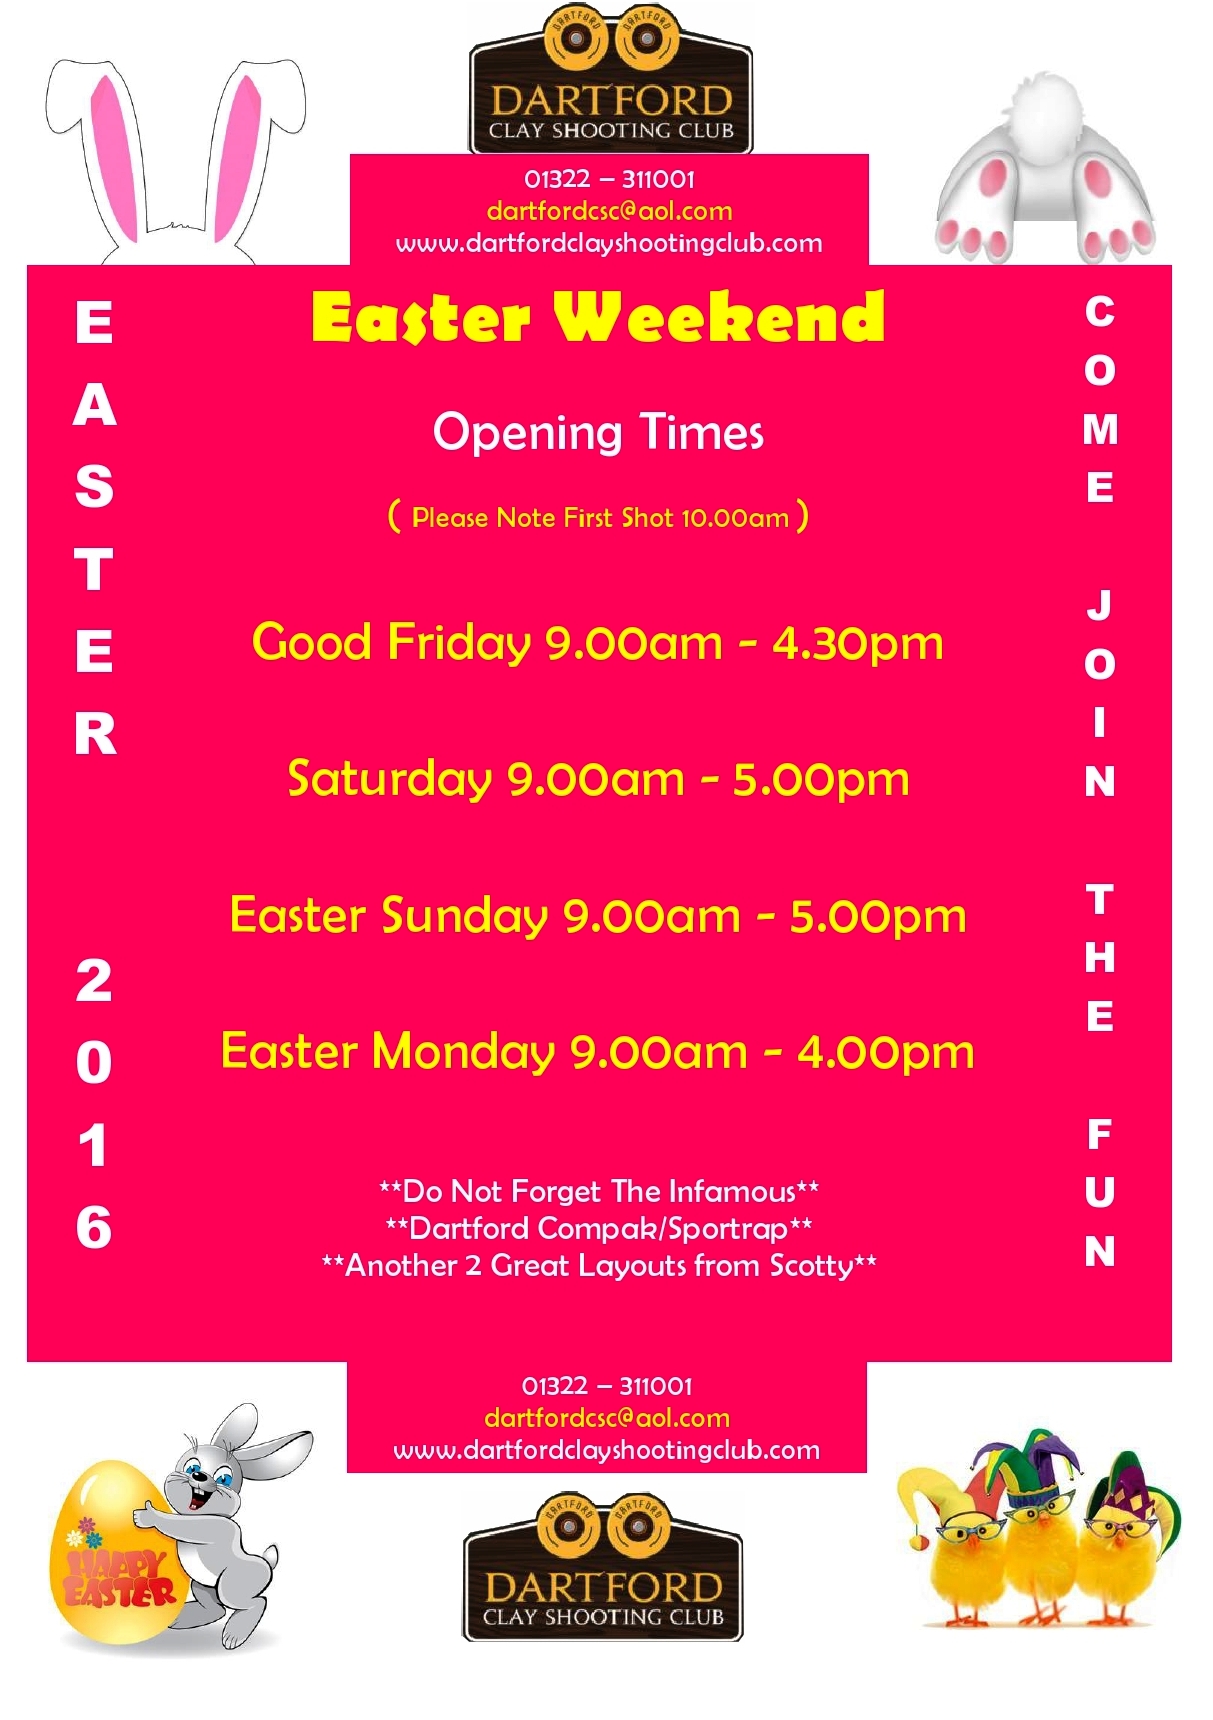 EASTER WEEKEND MARCH 25TH 28TH 2016